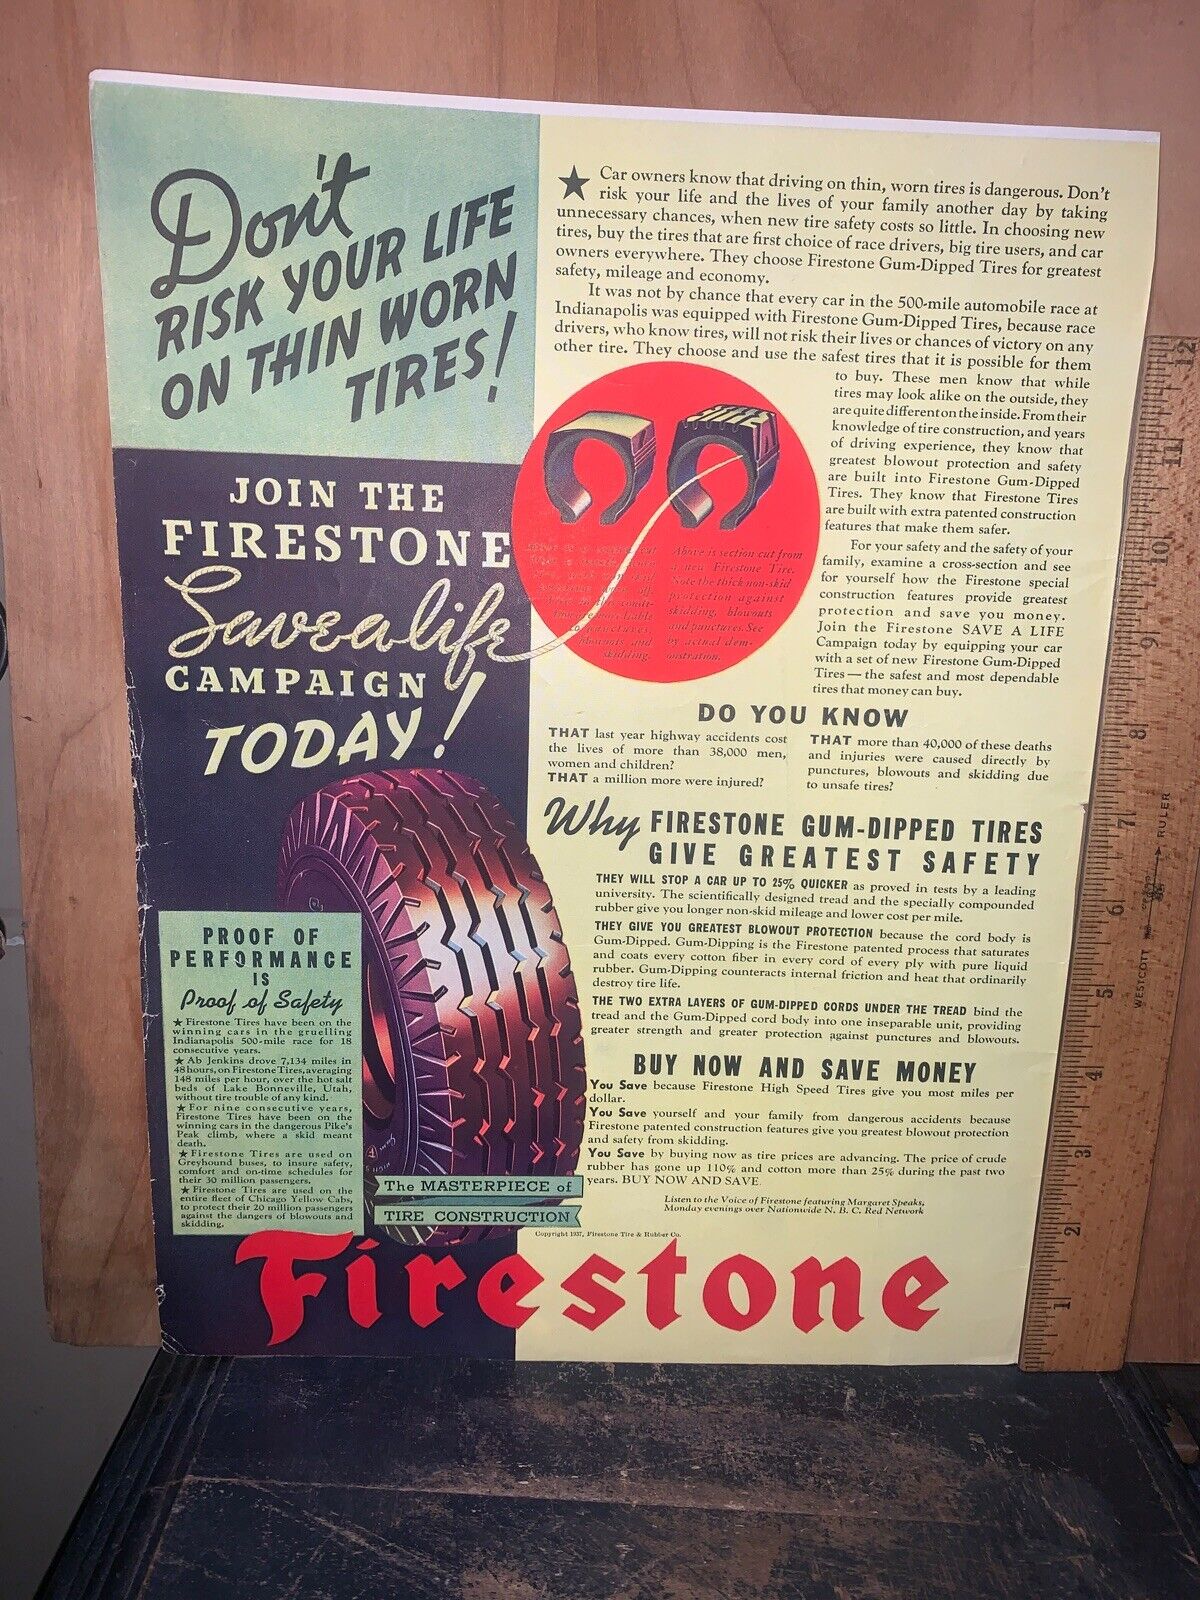 1937 Fire Stone “Gum Dipped” Tires Print Ad Vintage.